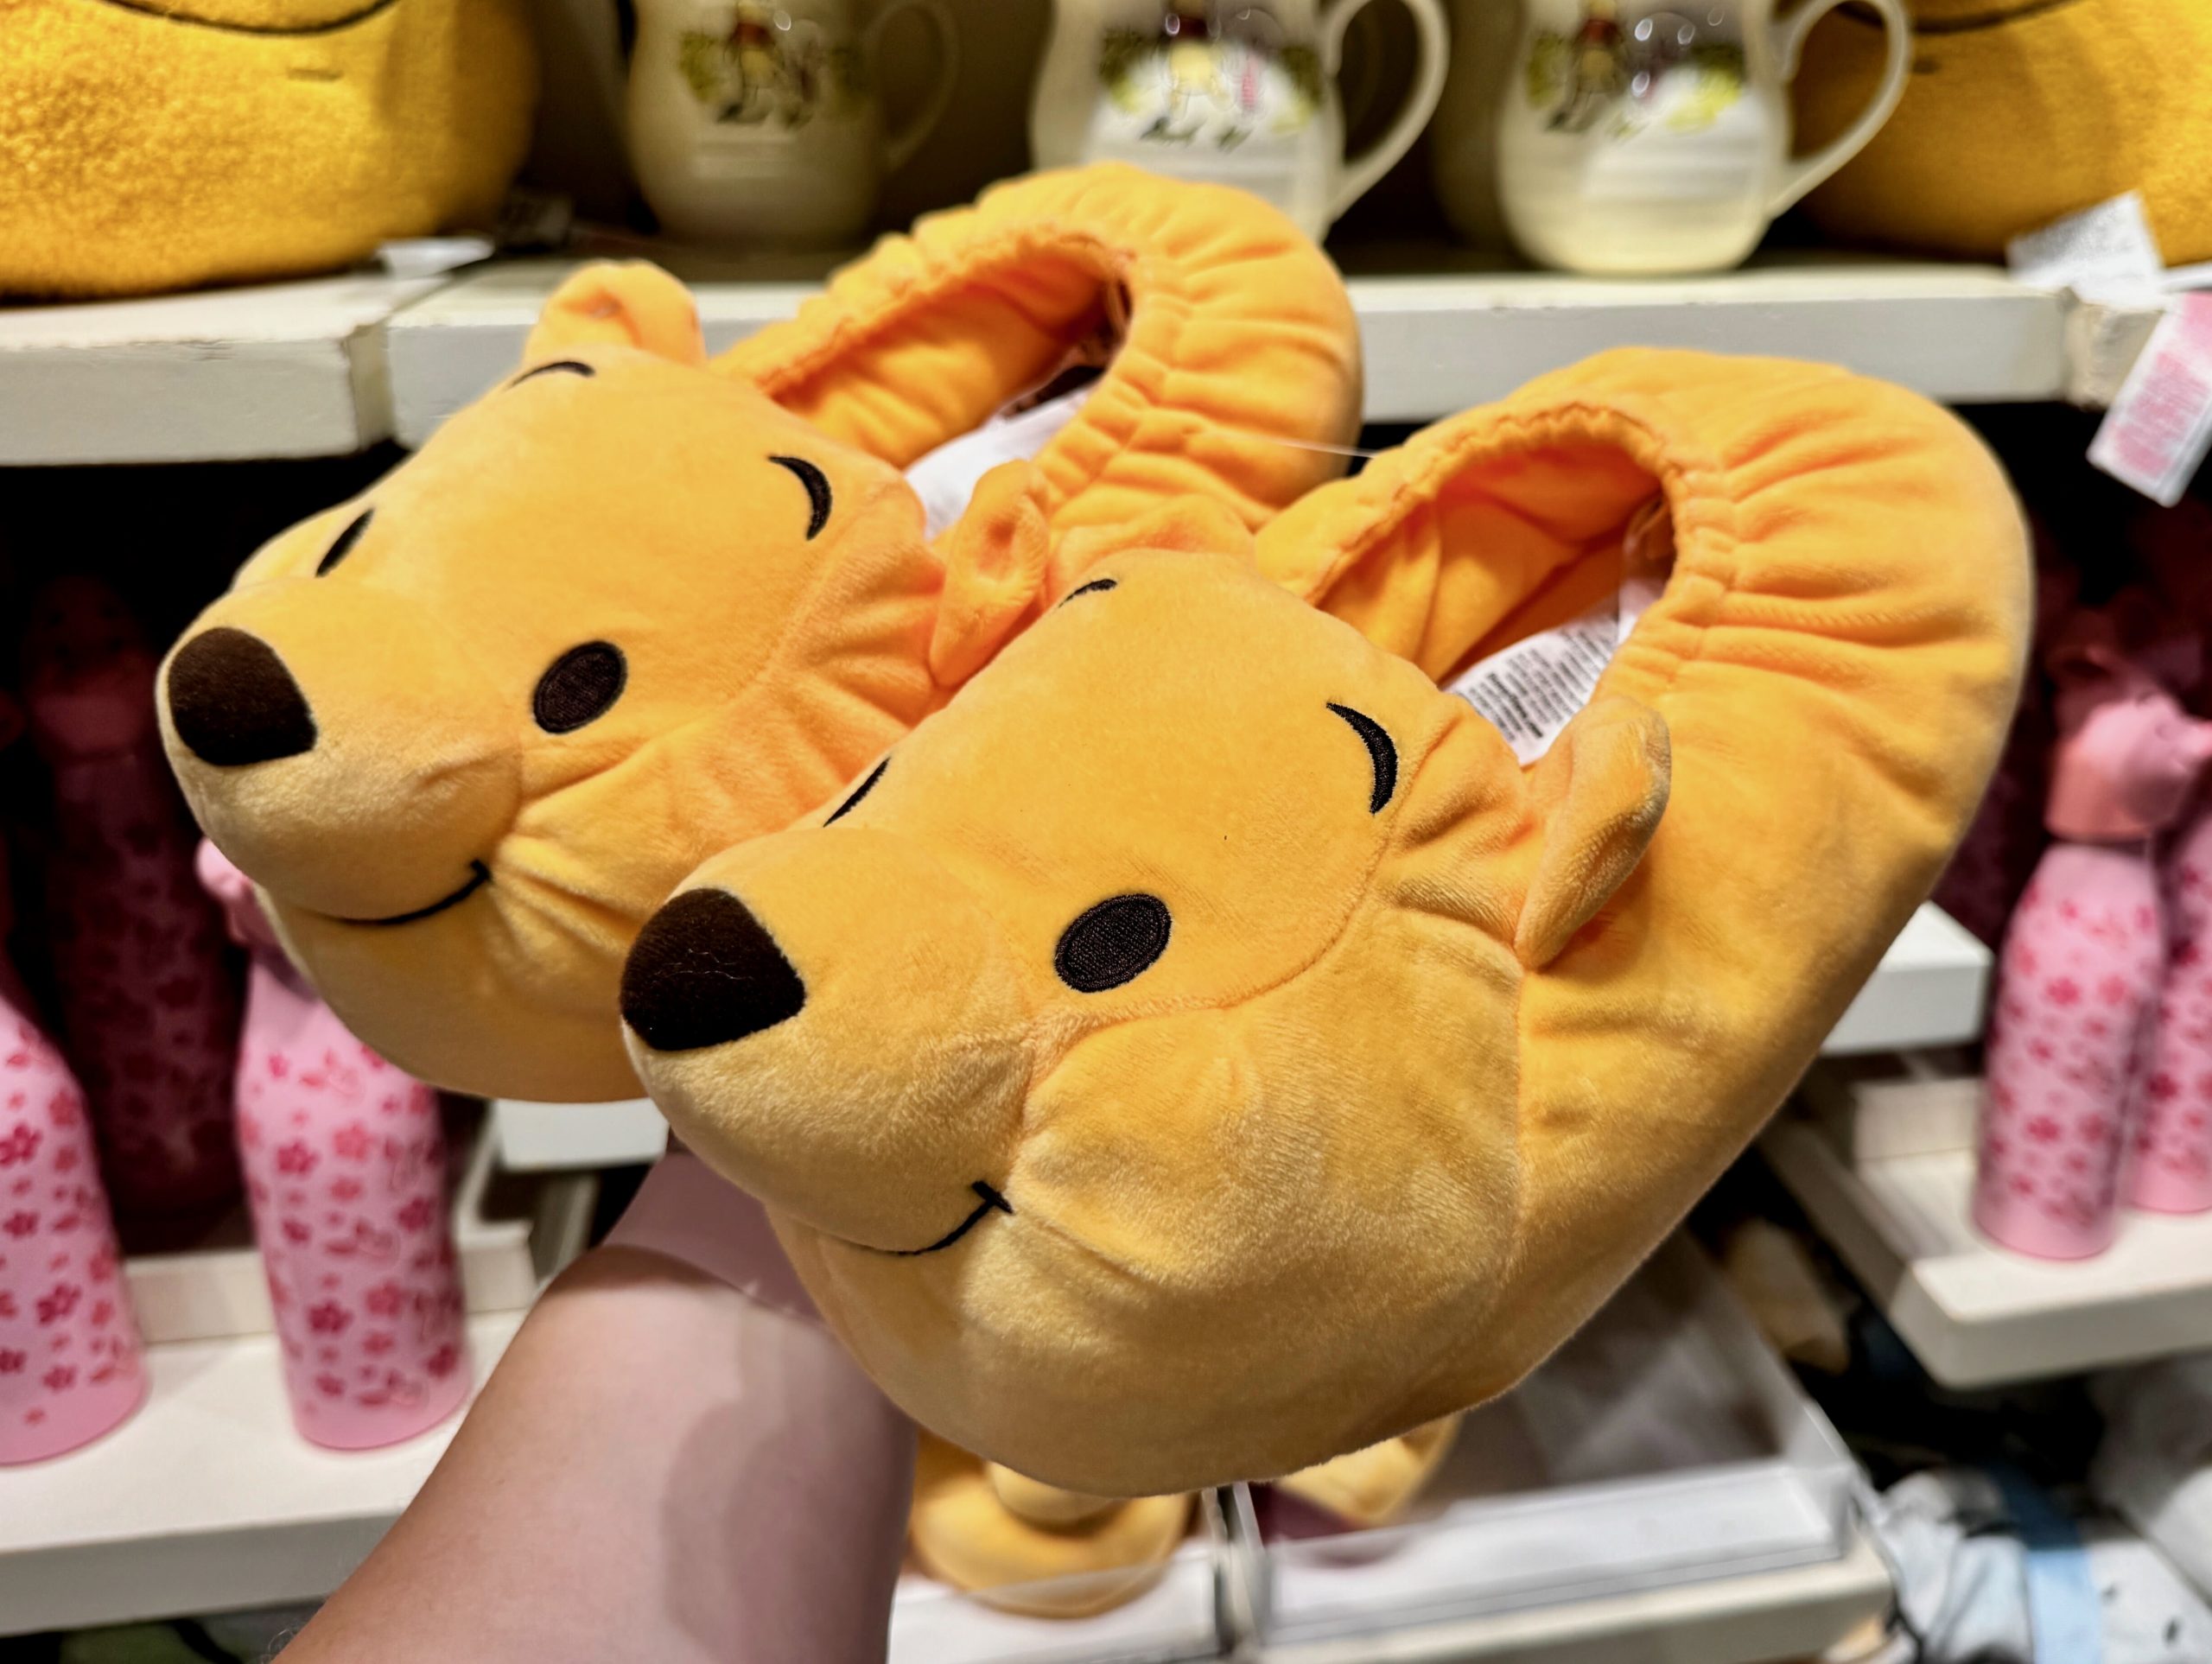 Winnie the Pooh Slippers at Hundred Acre Goods in Magic Kingdom